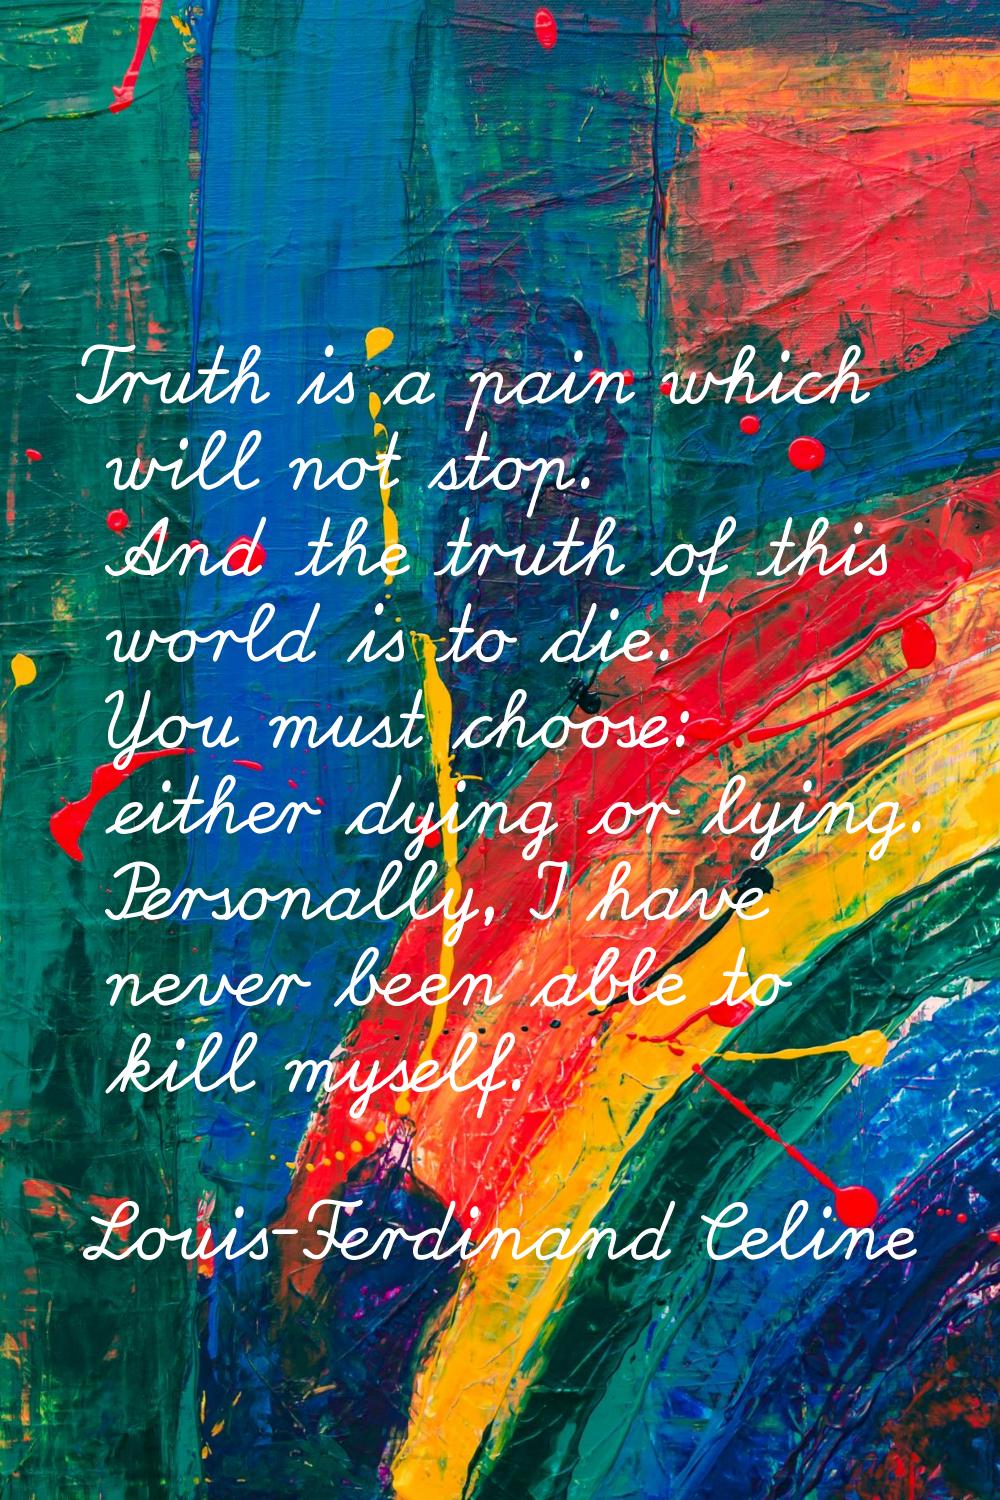 Truth is a pain which will not stop. And the truth of this world is to die. You must choose: either